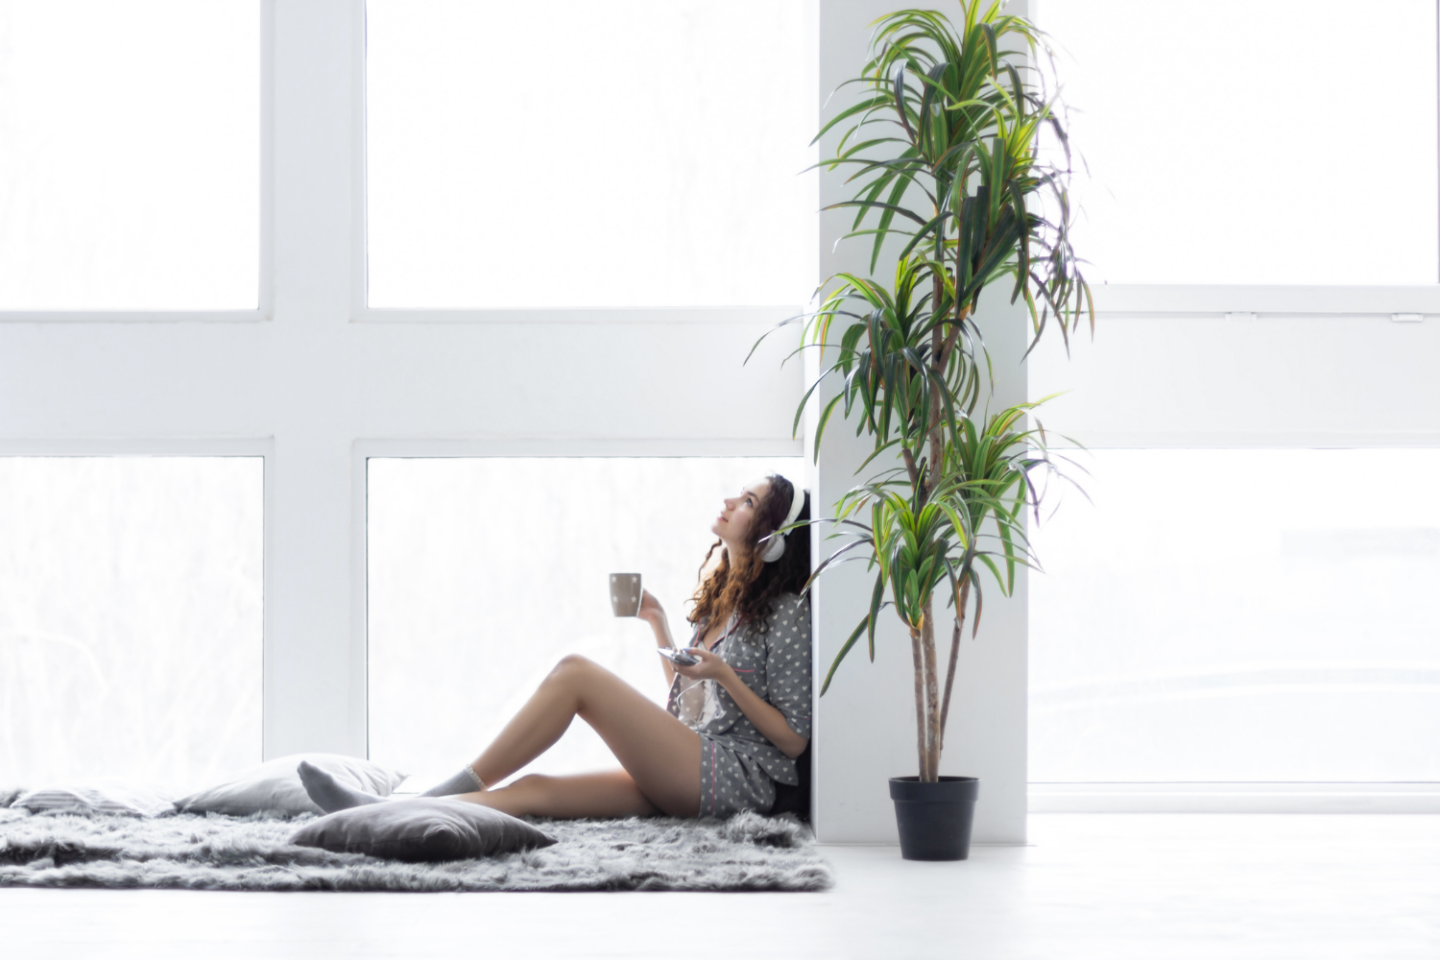 Woman sitting on the floor with her back to a column listening to music and contemplating productive morning routinesLocation is indoors in a white room with a large green plant.